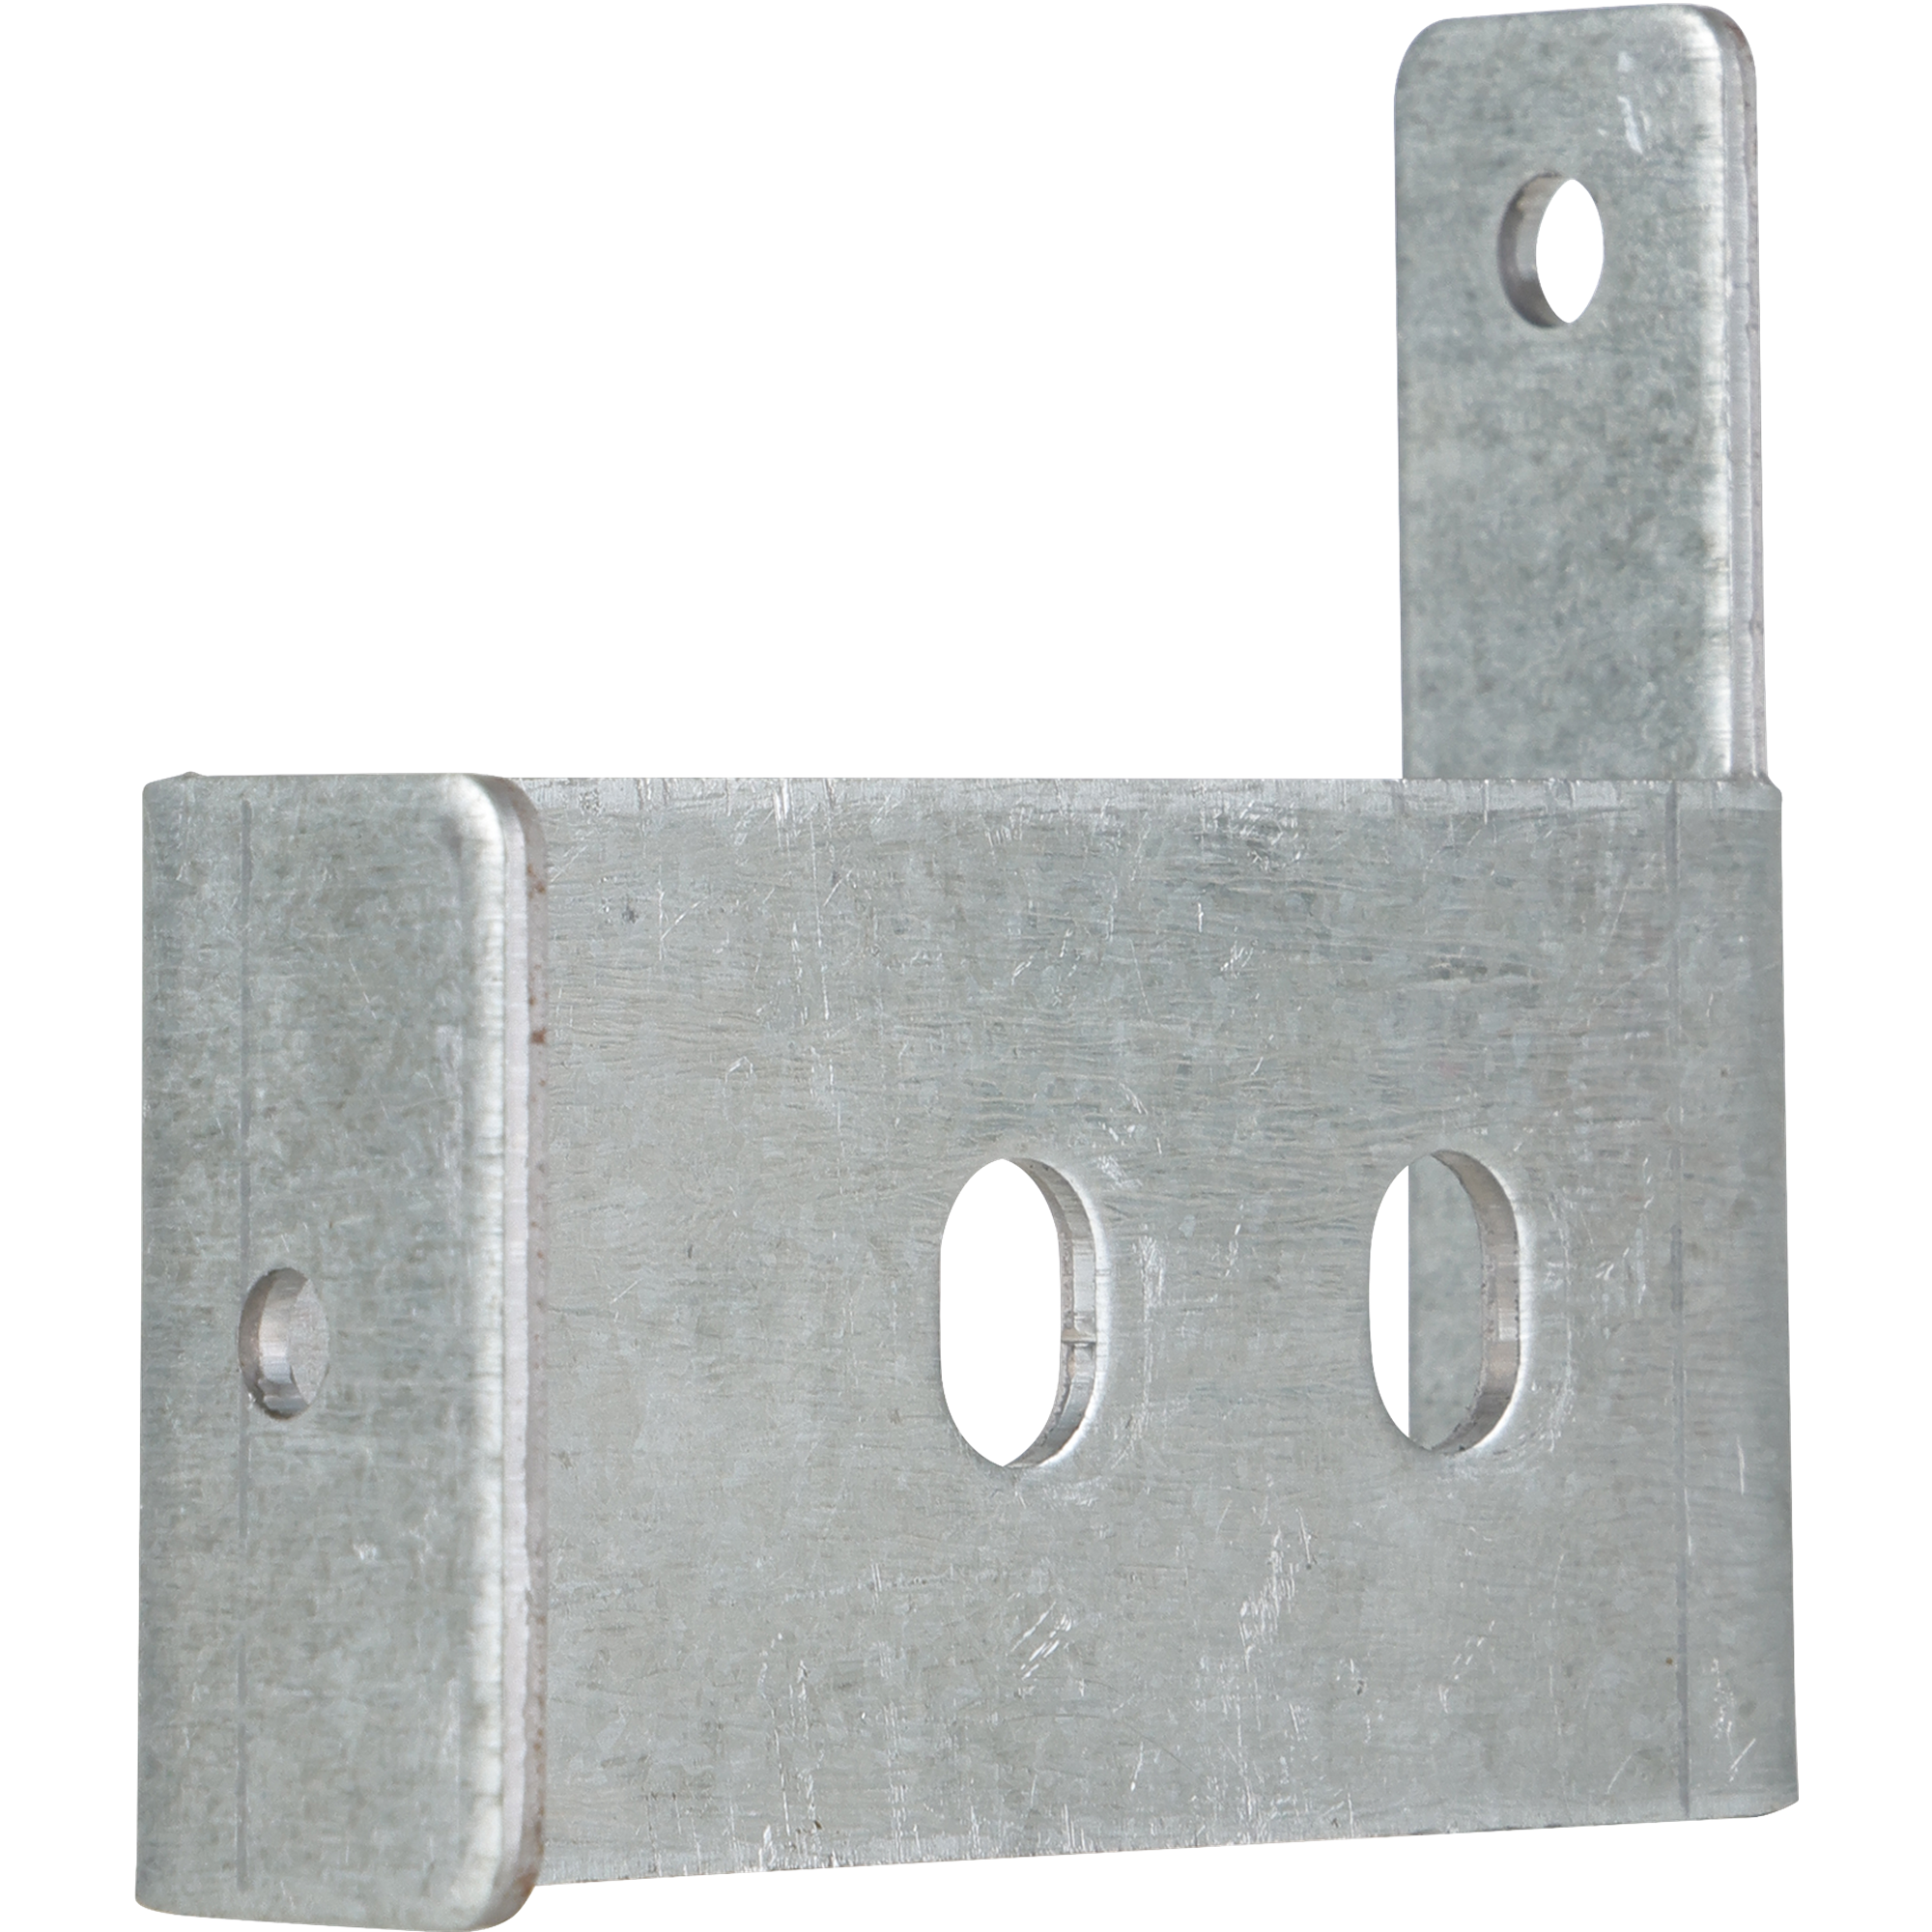 NHP Concept Panelboard Accessory Support Moulded Neutral Bracket